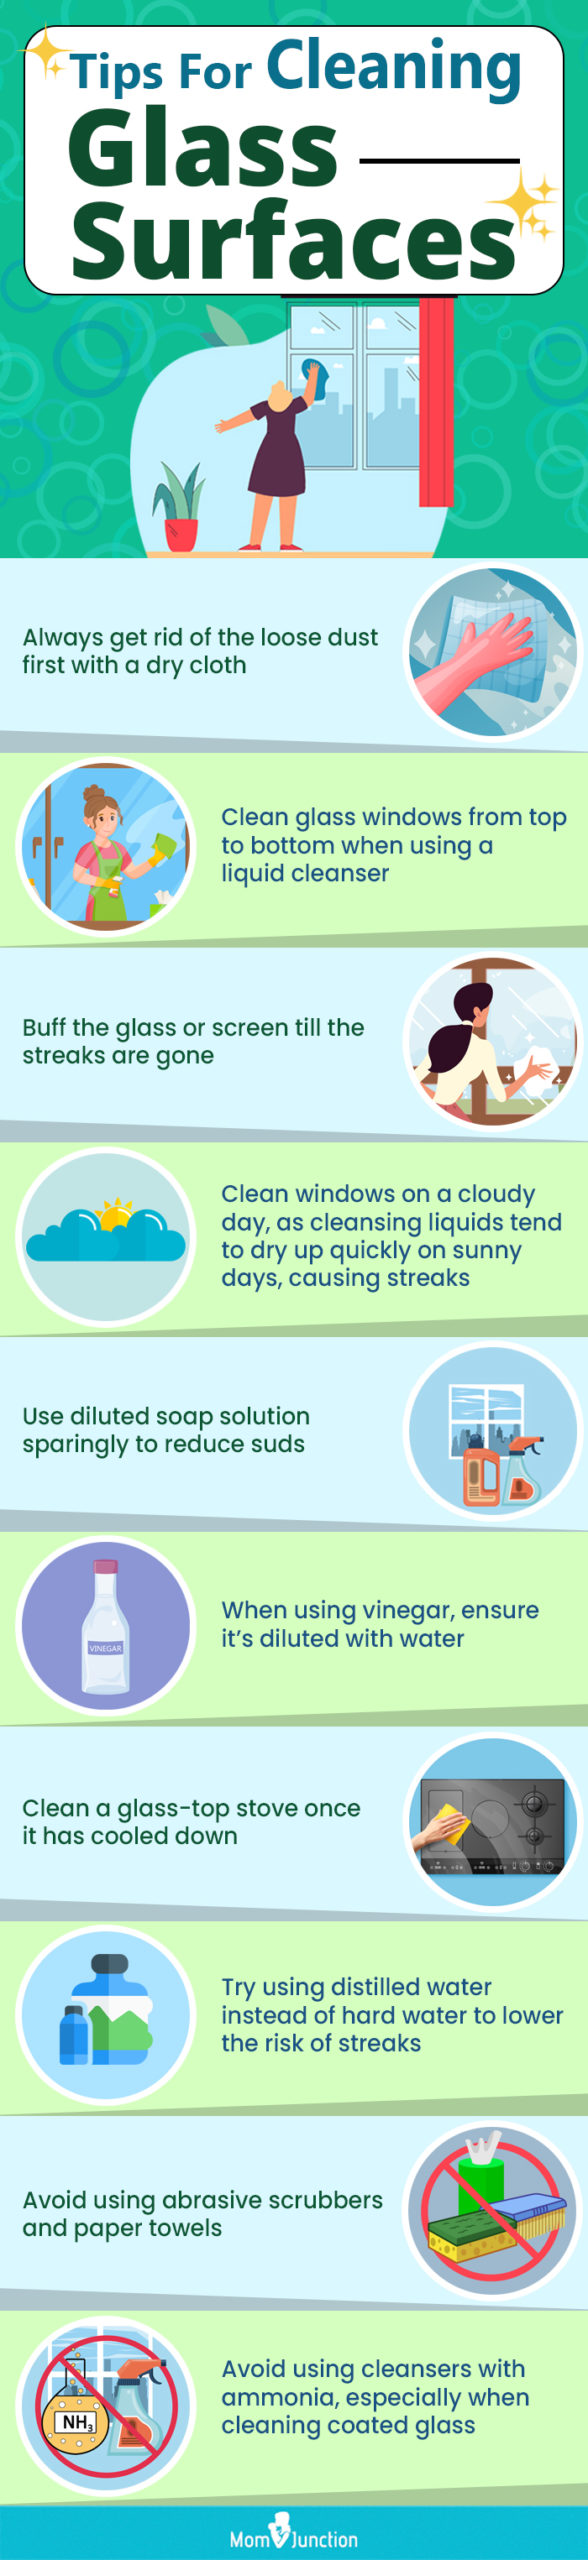 Tips For Cleaning Glass Surfaces (Infographic)